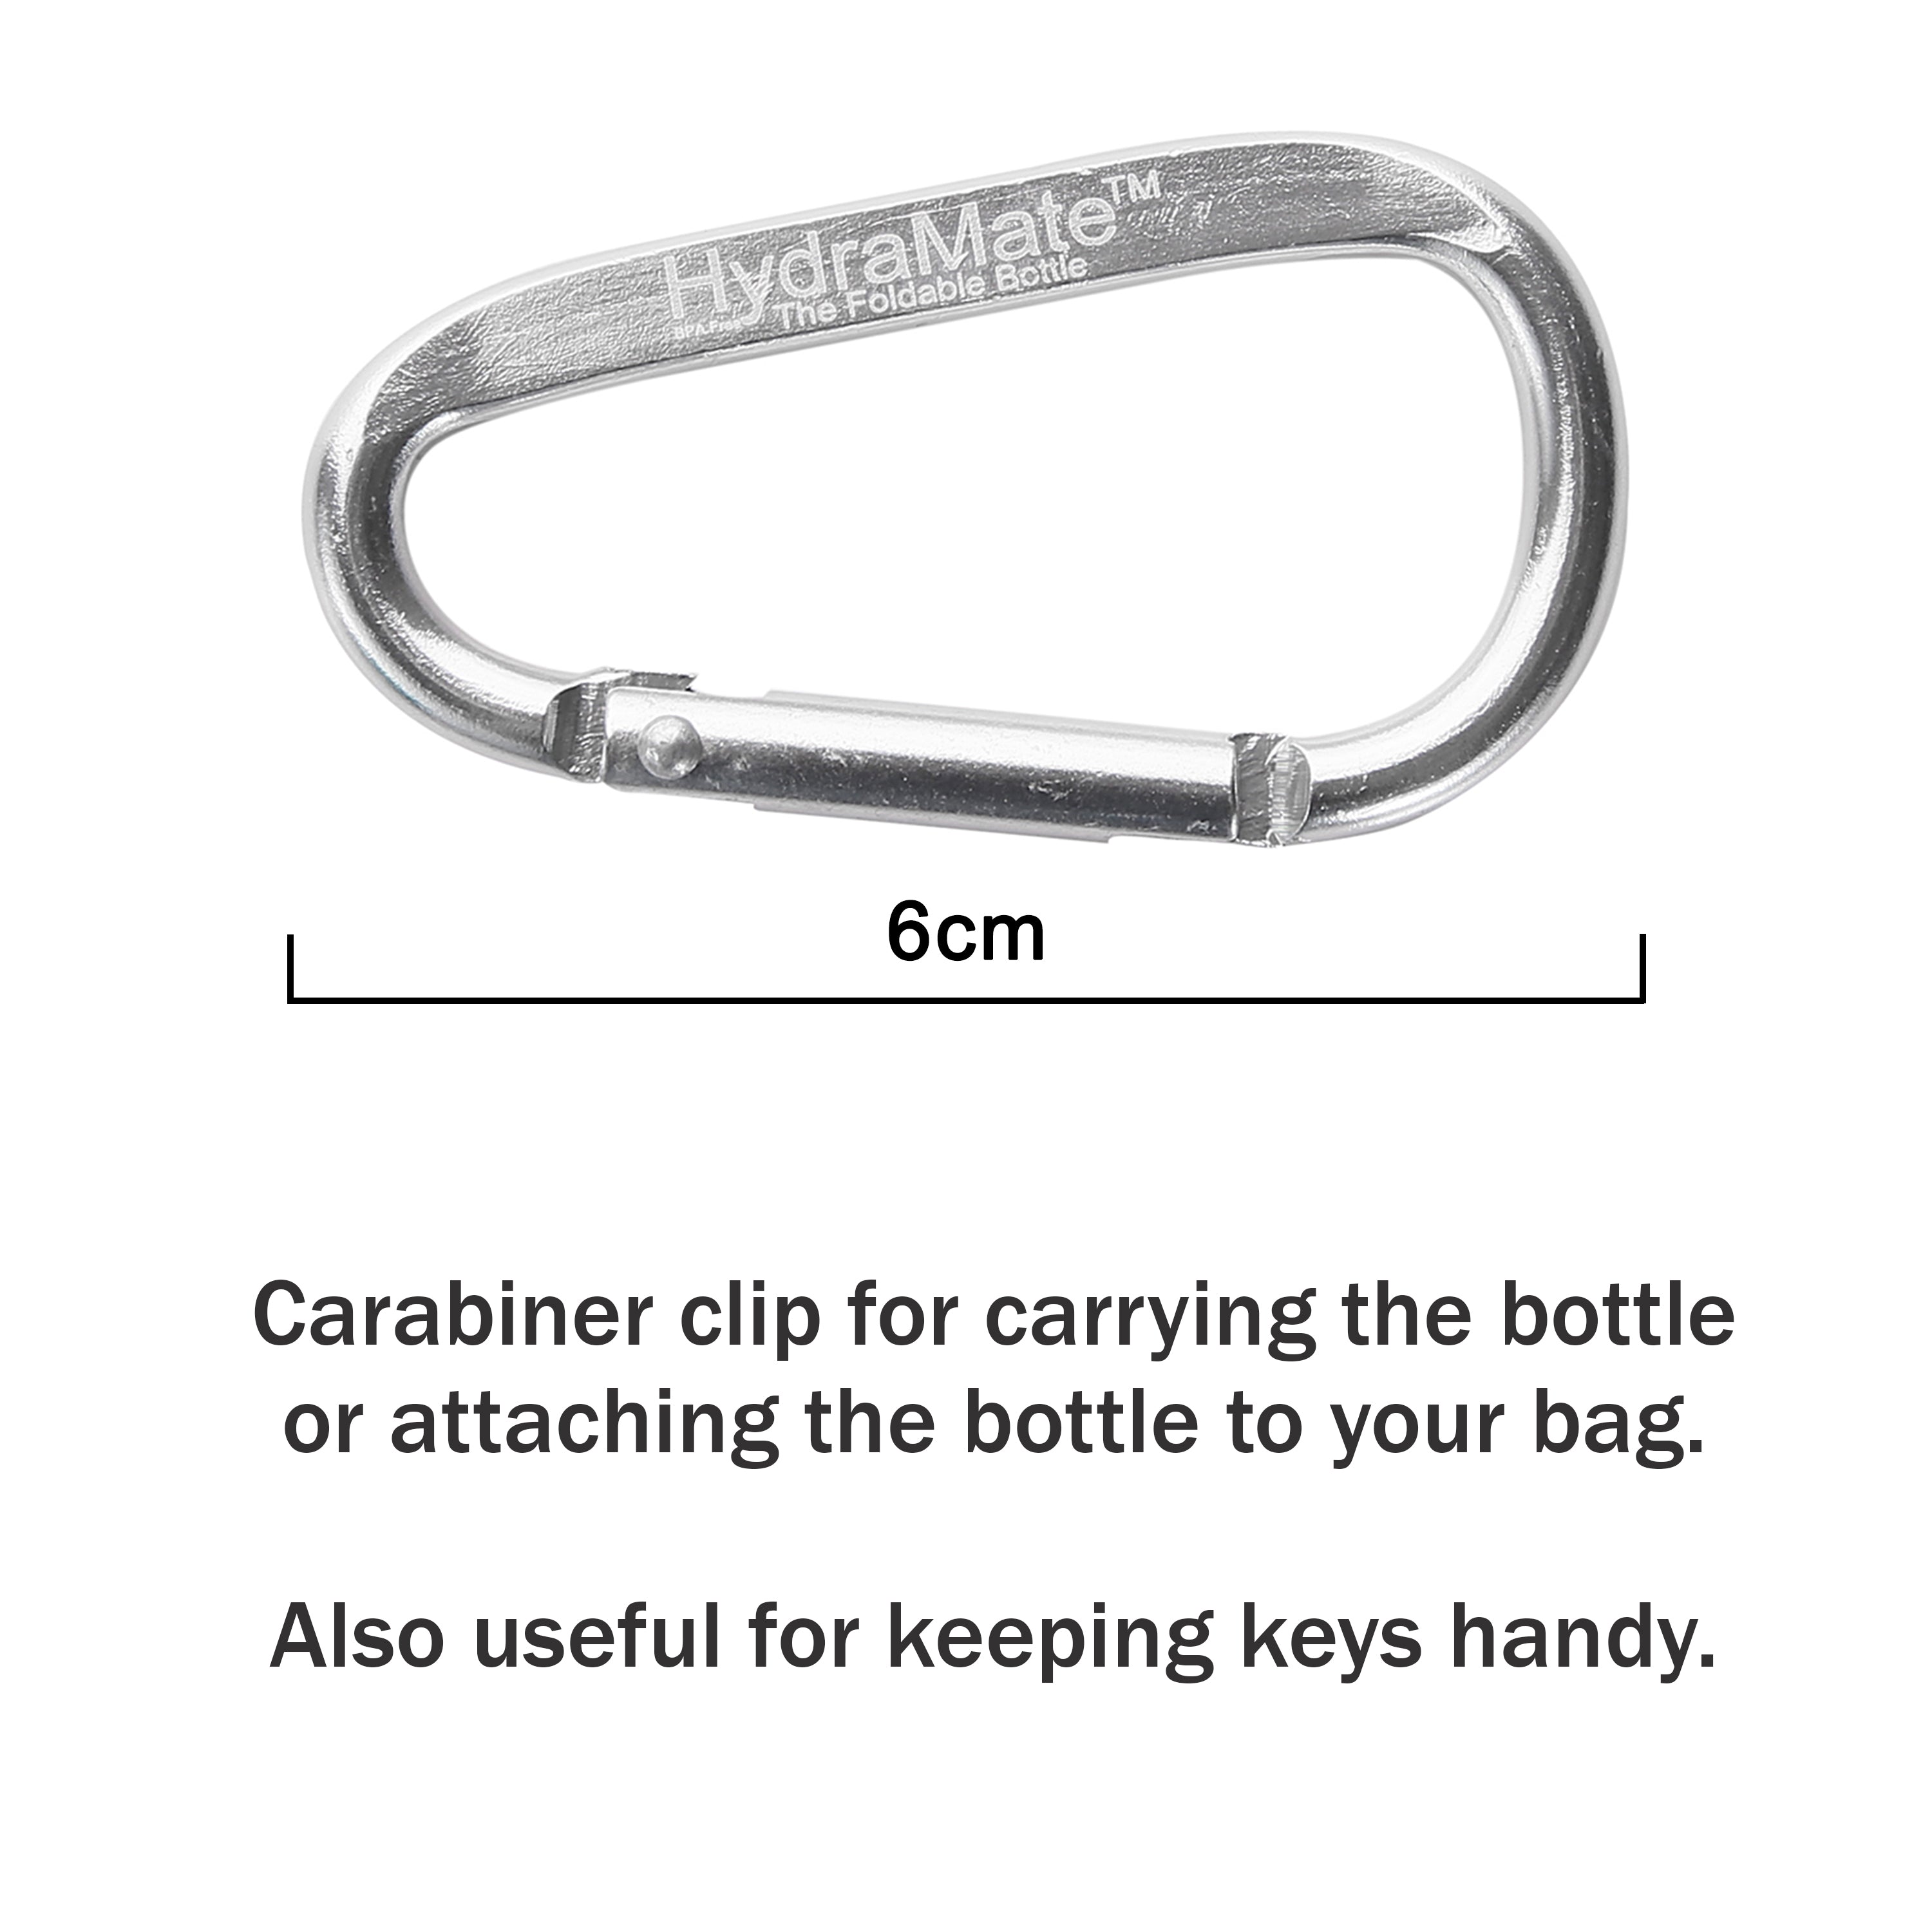 HydraMate Foldable Bottle. Collapsible 750ml